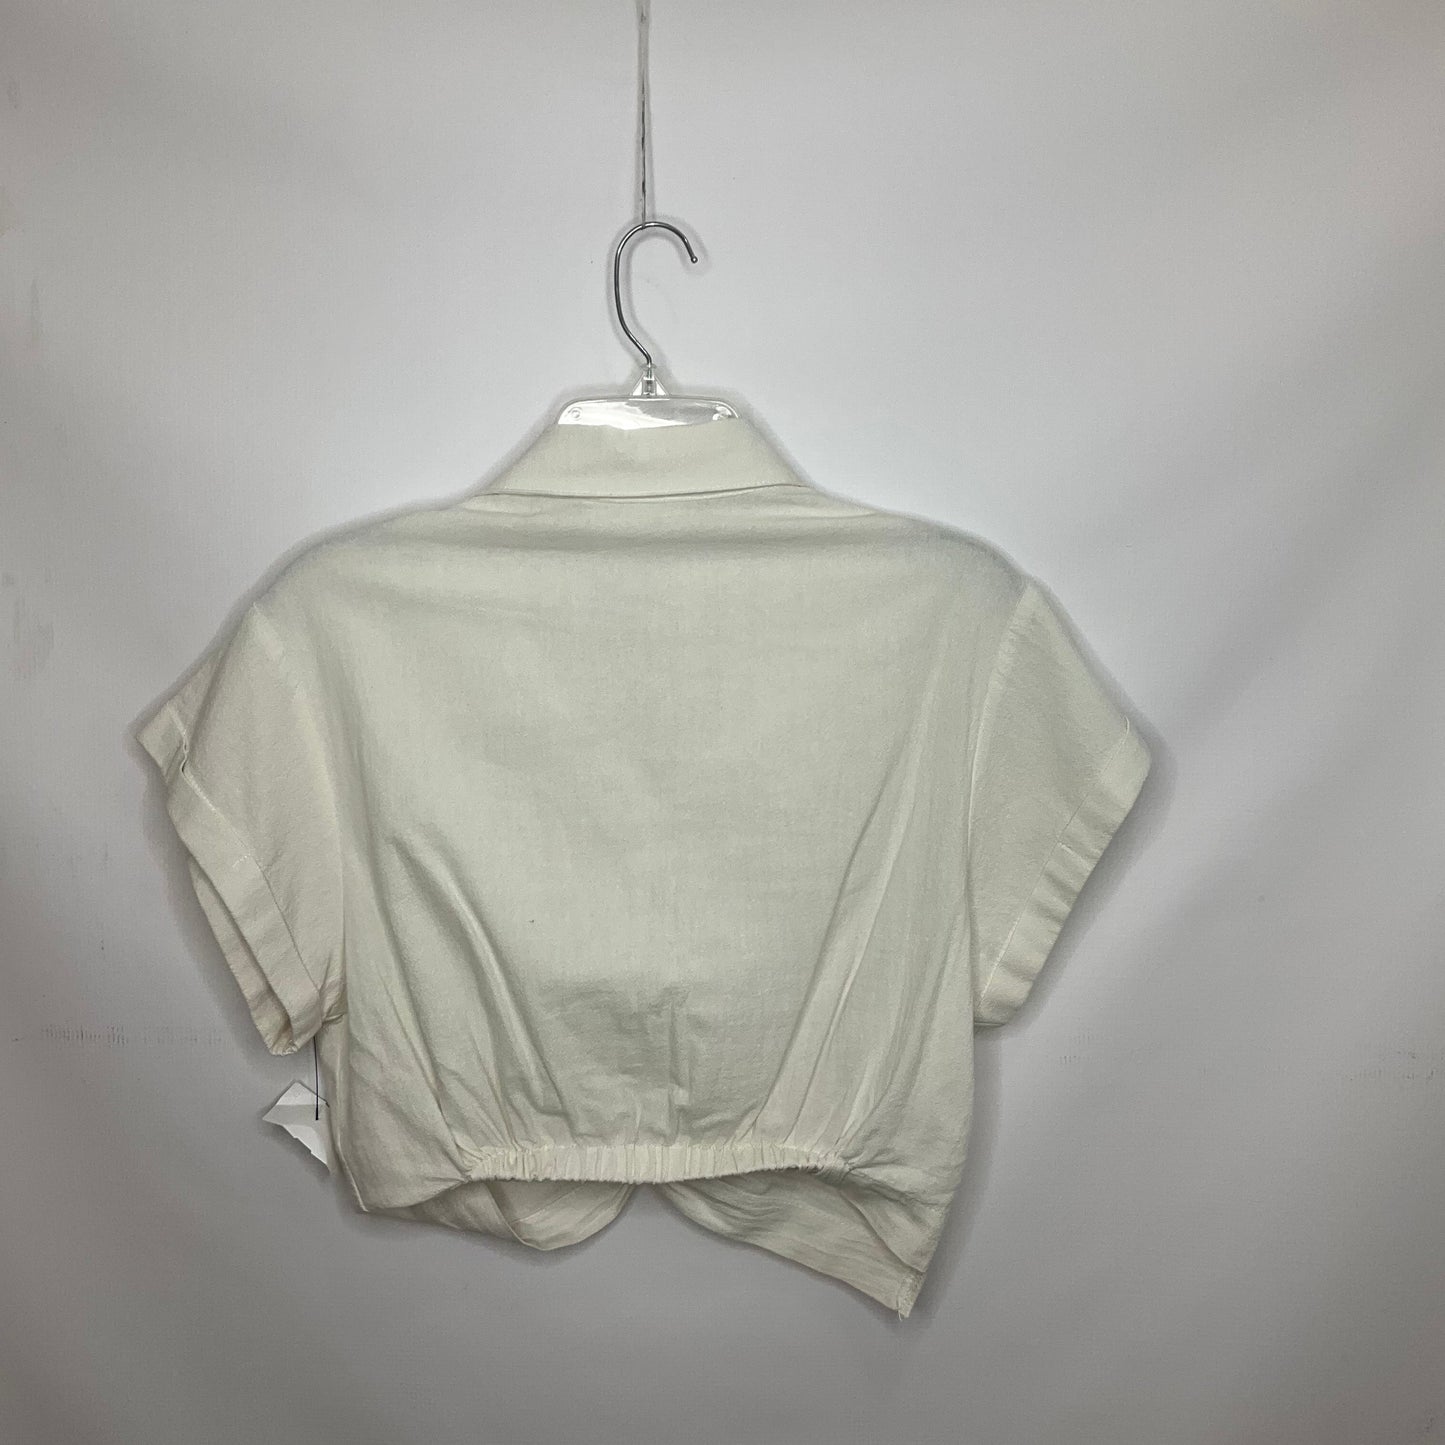 White Top Short Sleeve The Native One, Size M